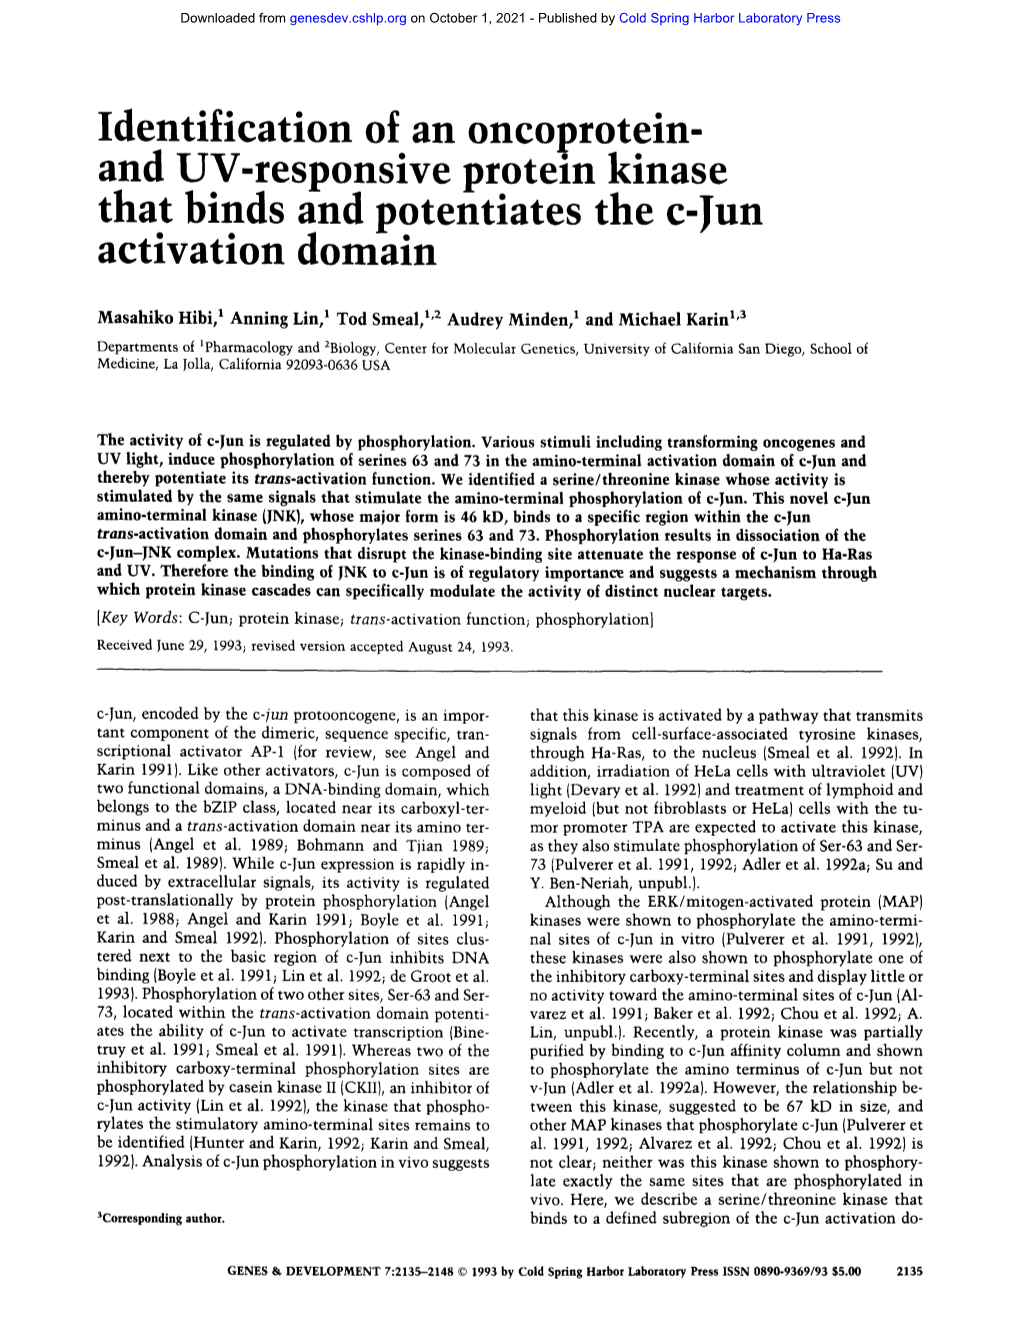 And UV-Responsive Protein Kinase That Binds and Potentiates the C-Jun Activation Domain